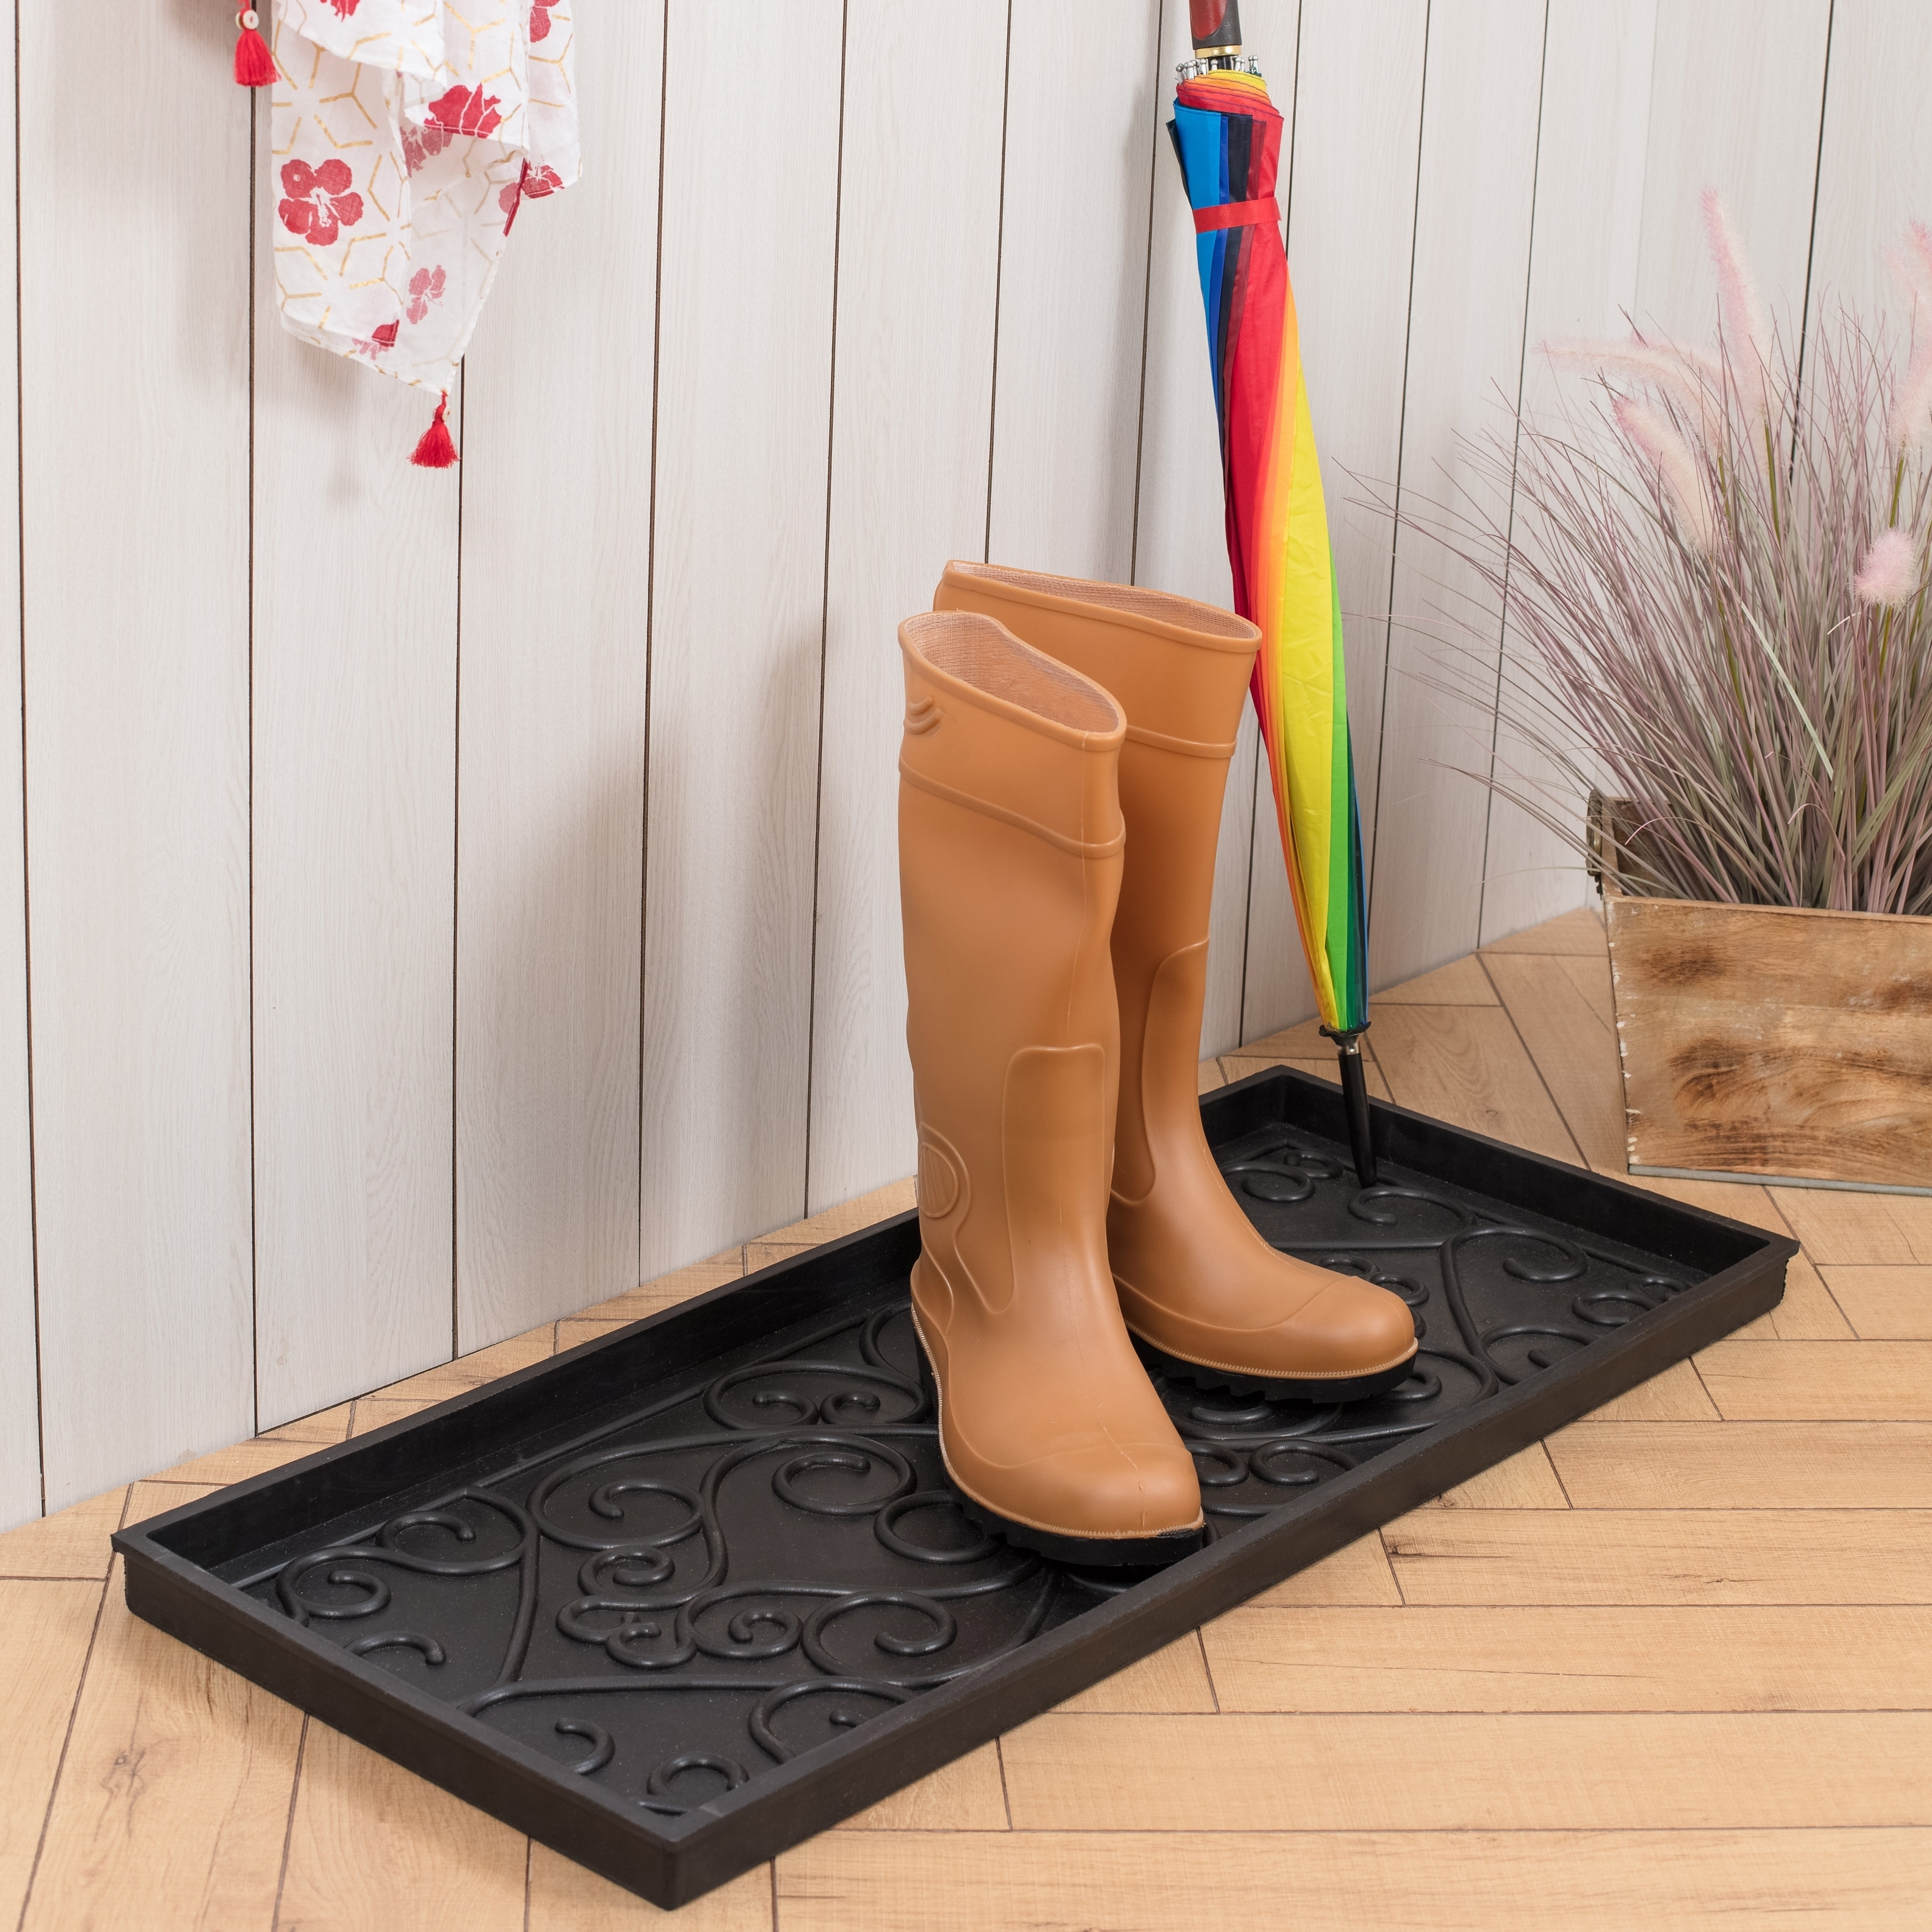 https://ak1.ostkcdn.com/images/products/29925688/Natural-and-Recycled-Rubber-Boot-Tray-with-Tan-and-Black-Coir-Insert-1639ce19-ff55-4585-a022-f48d9382b754.jpg